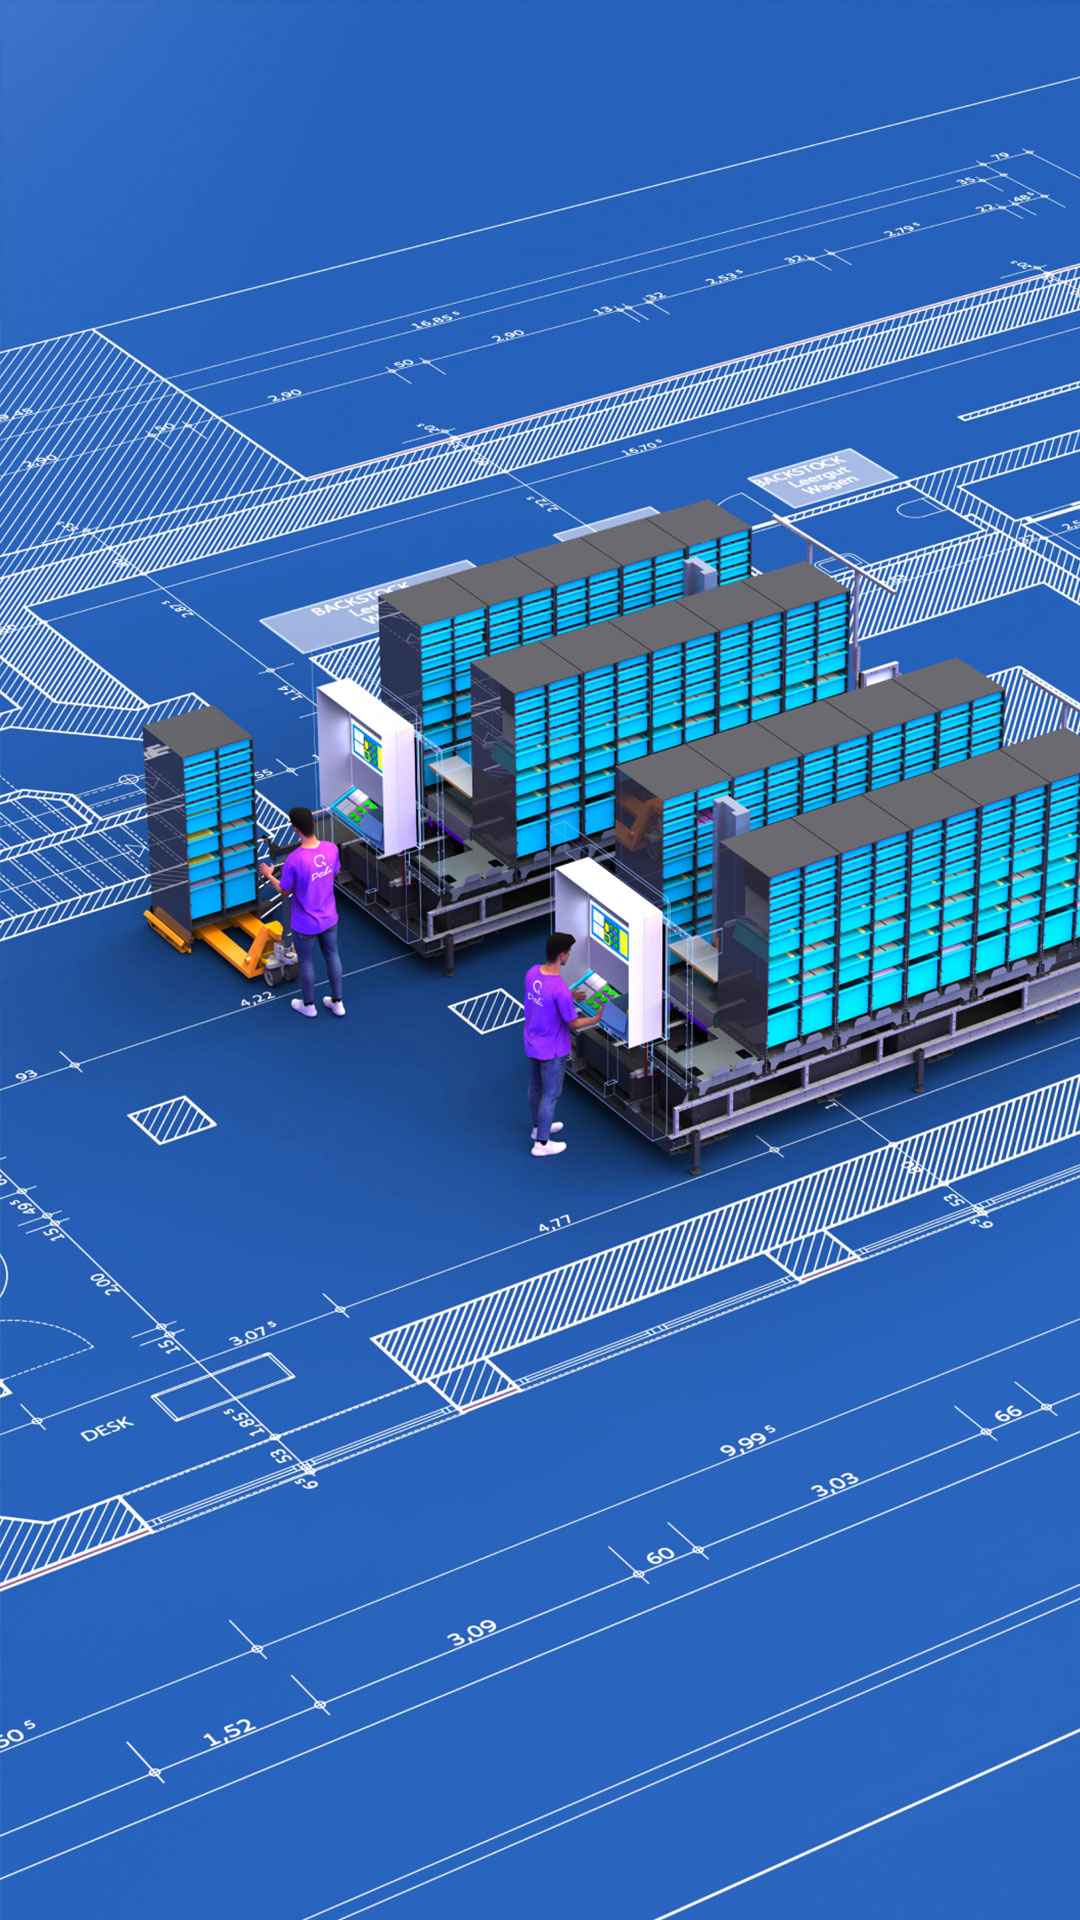 hyperlocal nano fulfillment center depiction of 2 containers being used